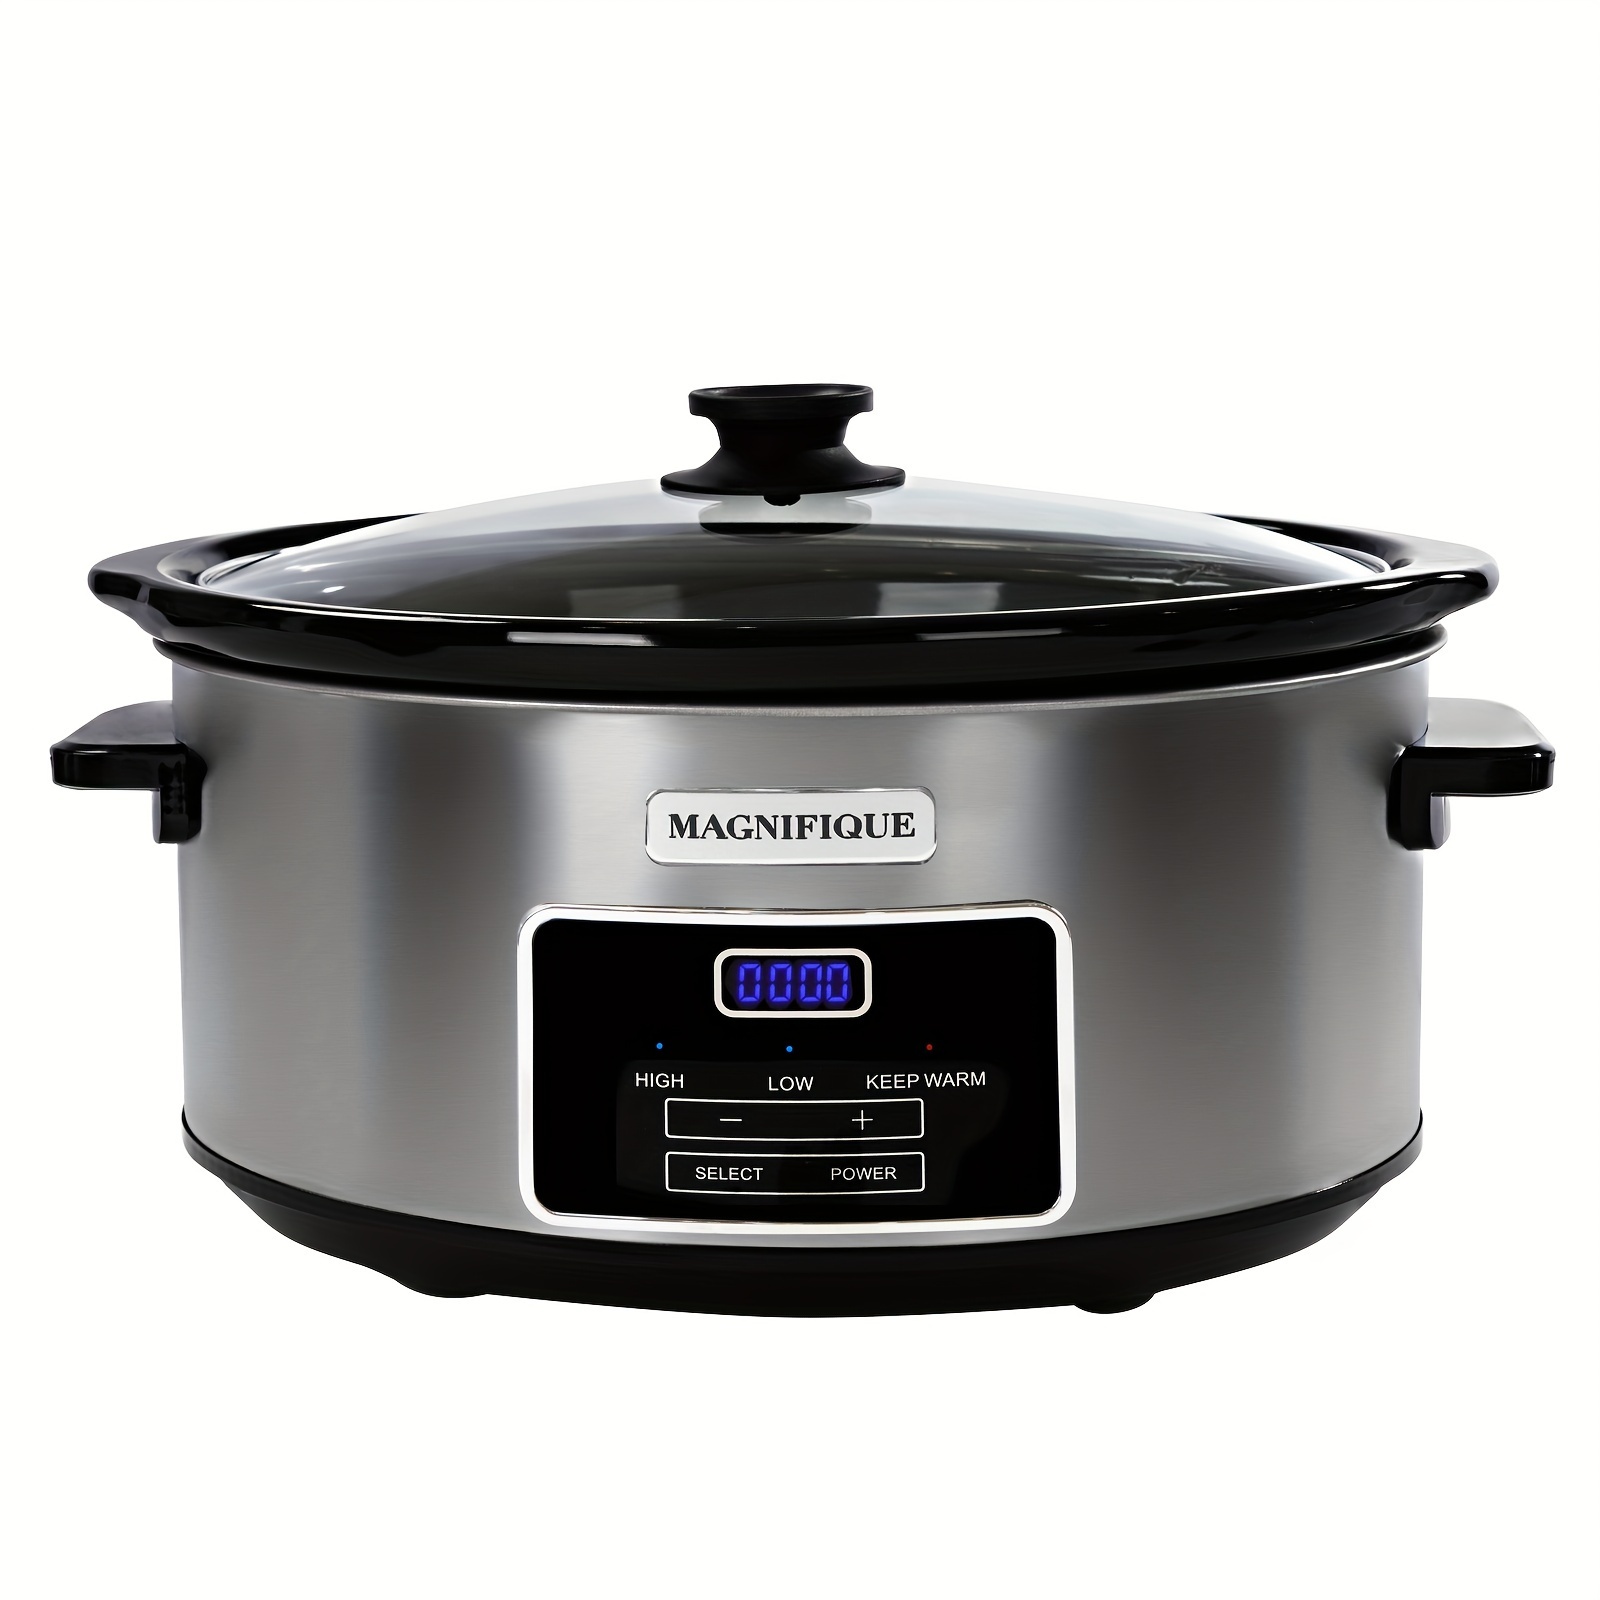 

7-quart Programmable Slow Cooker With Keep Warm Setting, Digital Timer - Perfect Kitchen Small Appliance For Family Dinners - Large Enough To Serve 8+ People